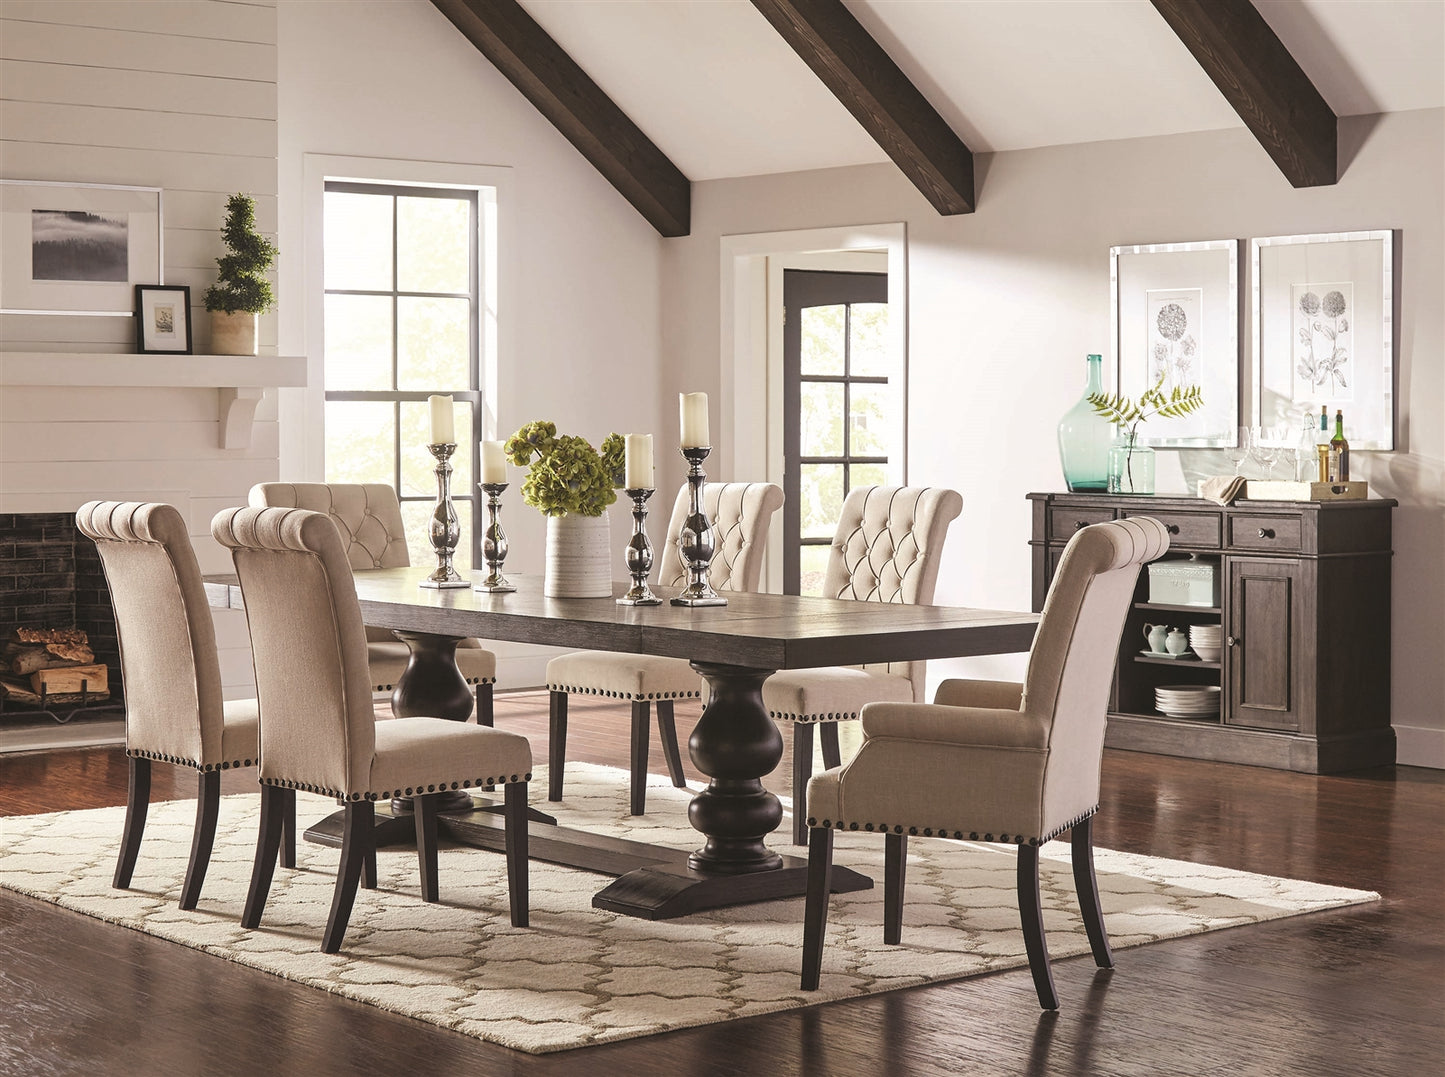 Phelps 7 Piece Traditional Antique Noir Dining Set with Beige Linen Chairs